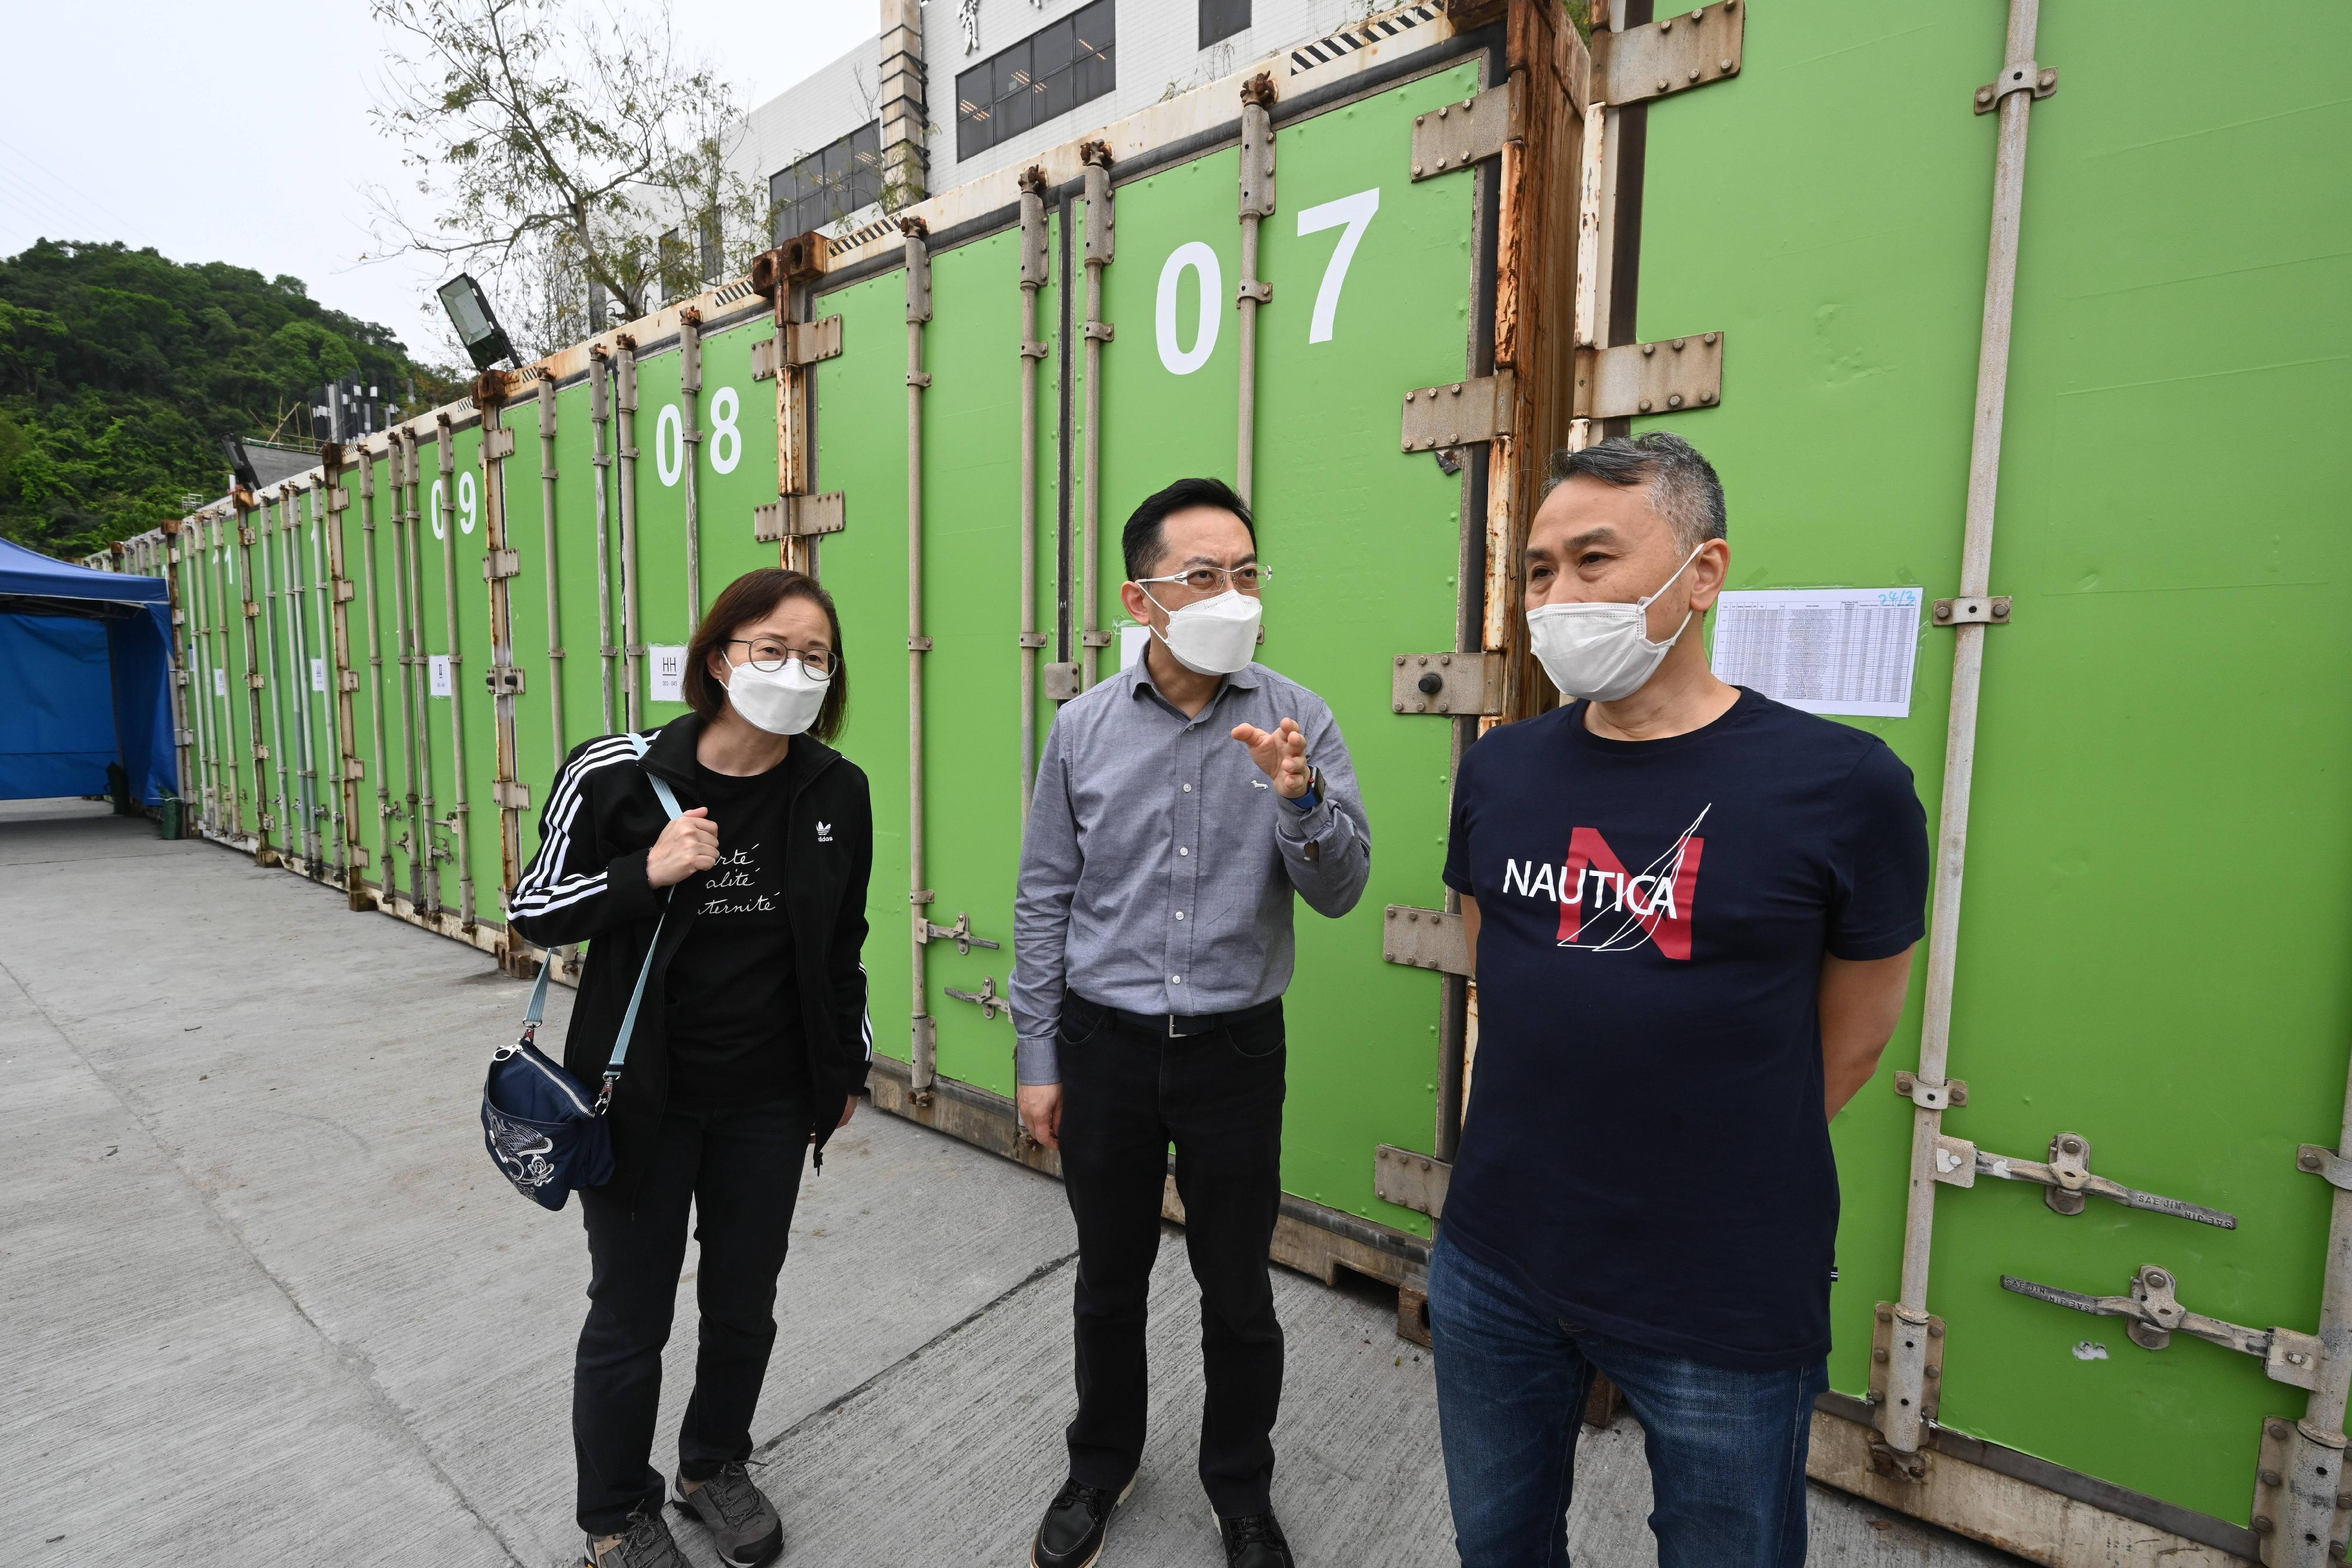 The Government has earlier installed new storage facility at government sites near the Fu Shan Public Mortuary in Sha Tin to expand storage capacity. Photo shows the Director of Health, Dr Ronald Lam (centre), accompanied by the Controller of Regulatory Affairs of the Department of Health (DH), Dr Amy Chiu (left), and the Consultant Forensic Pathologist-in-charge of the DH, Dr Poon Wai-ming (right), today (March 27) inspecting the new storage facility.